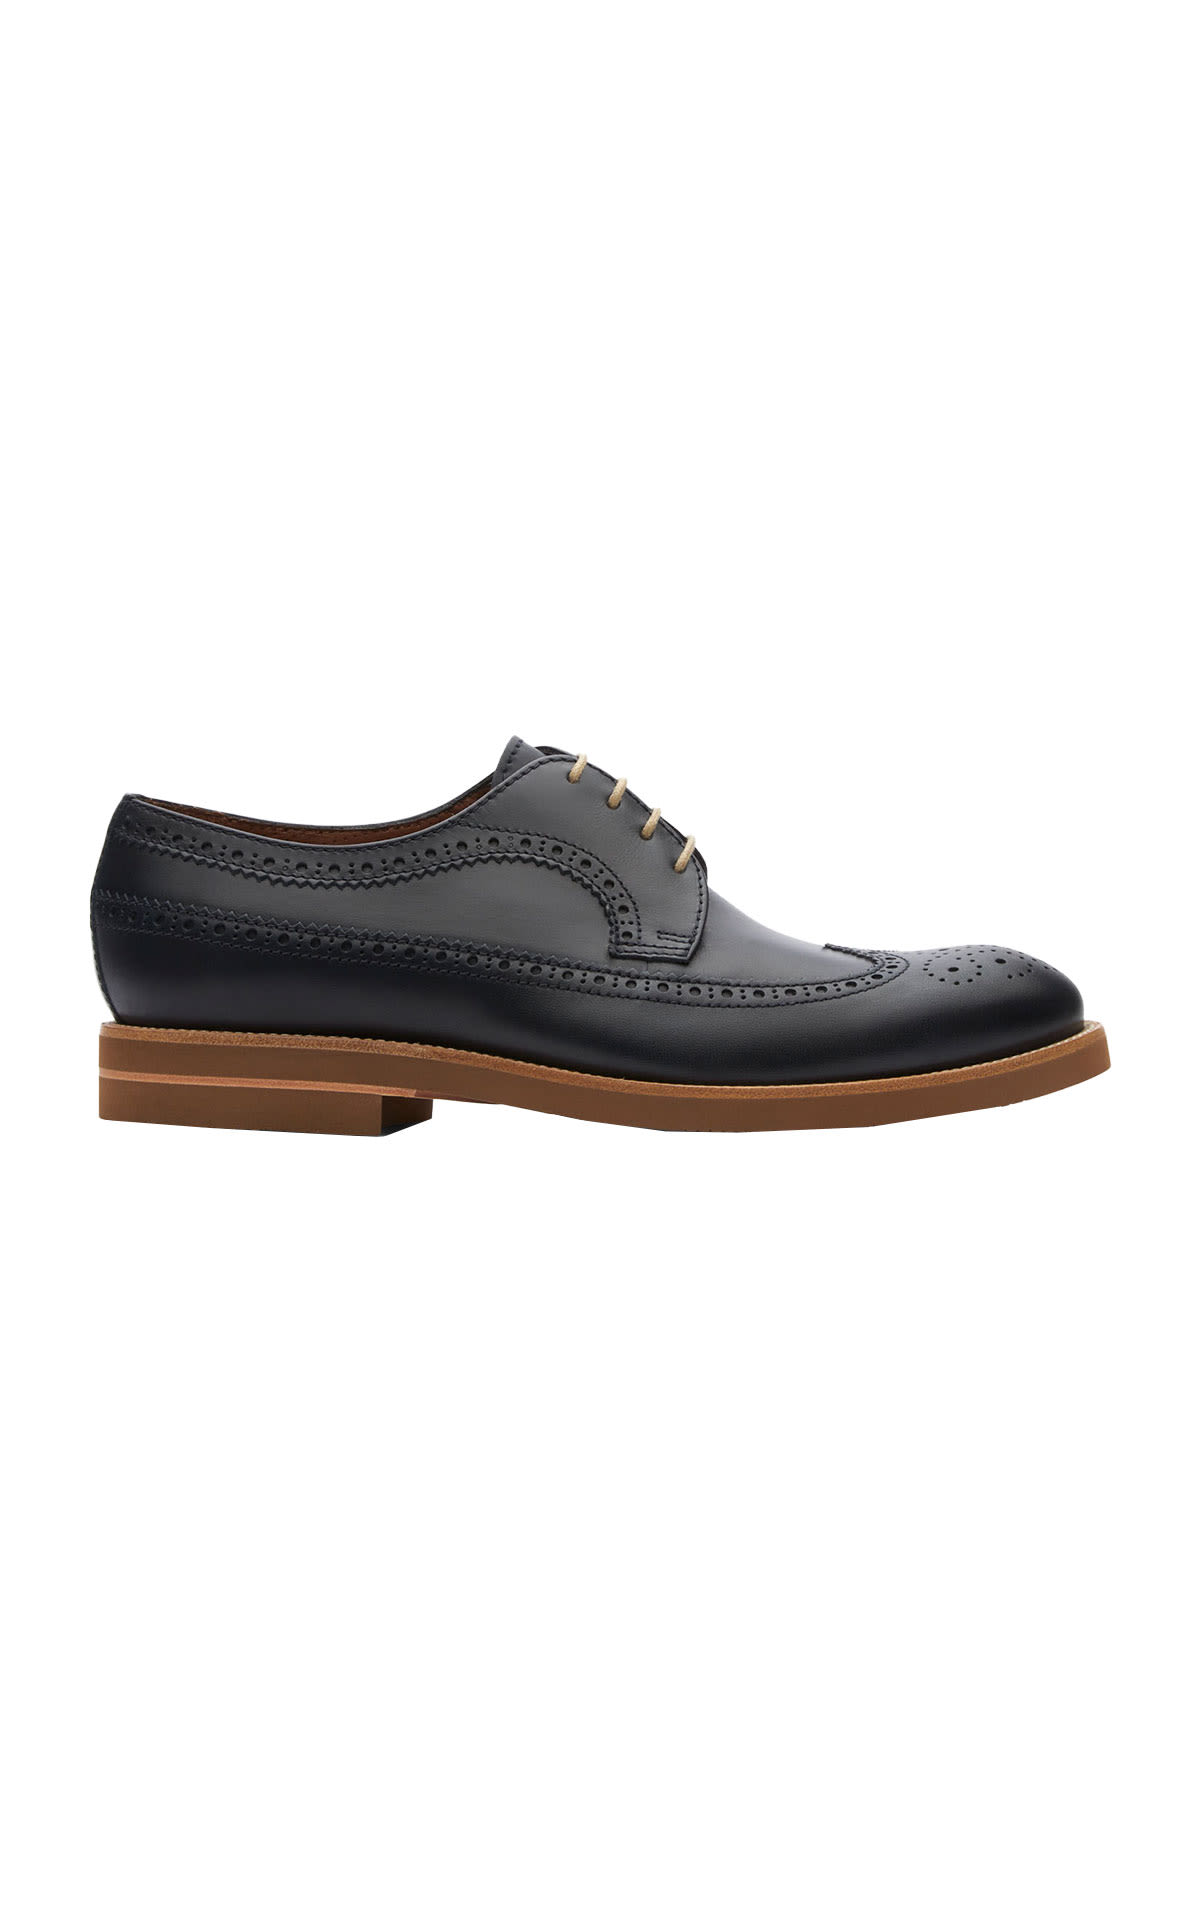 Men's shoe with laces and a round toe from the Niza line in navy blue lottusse